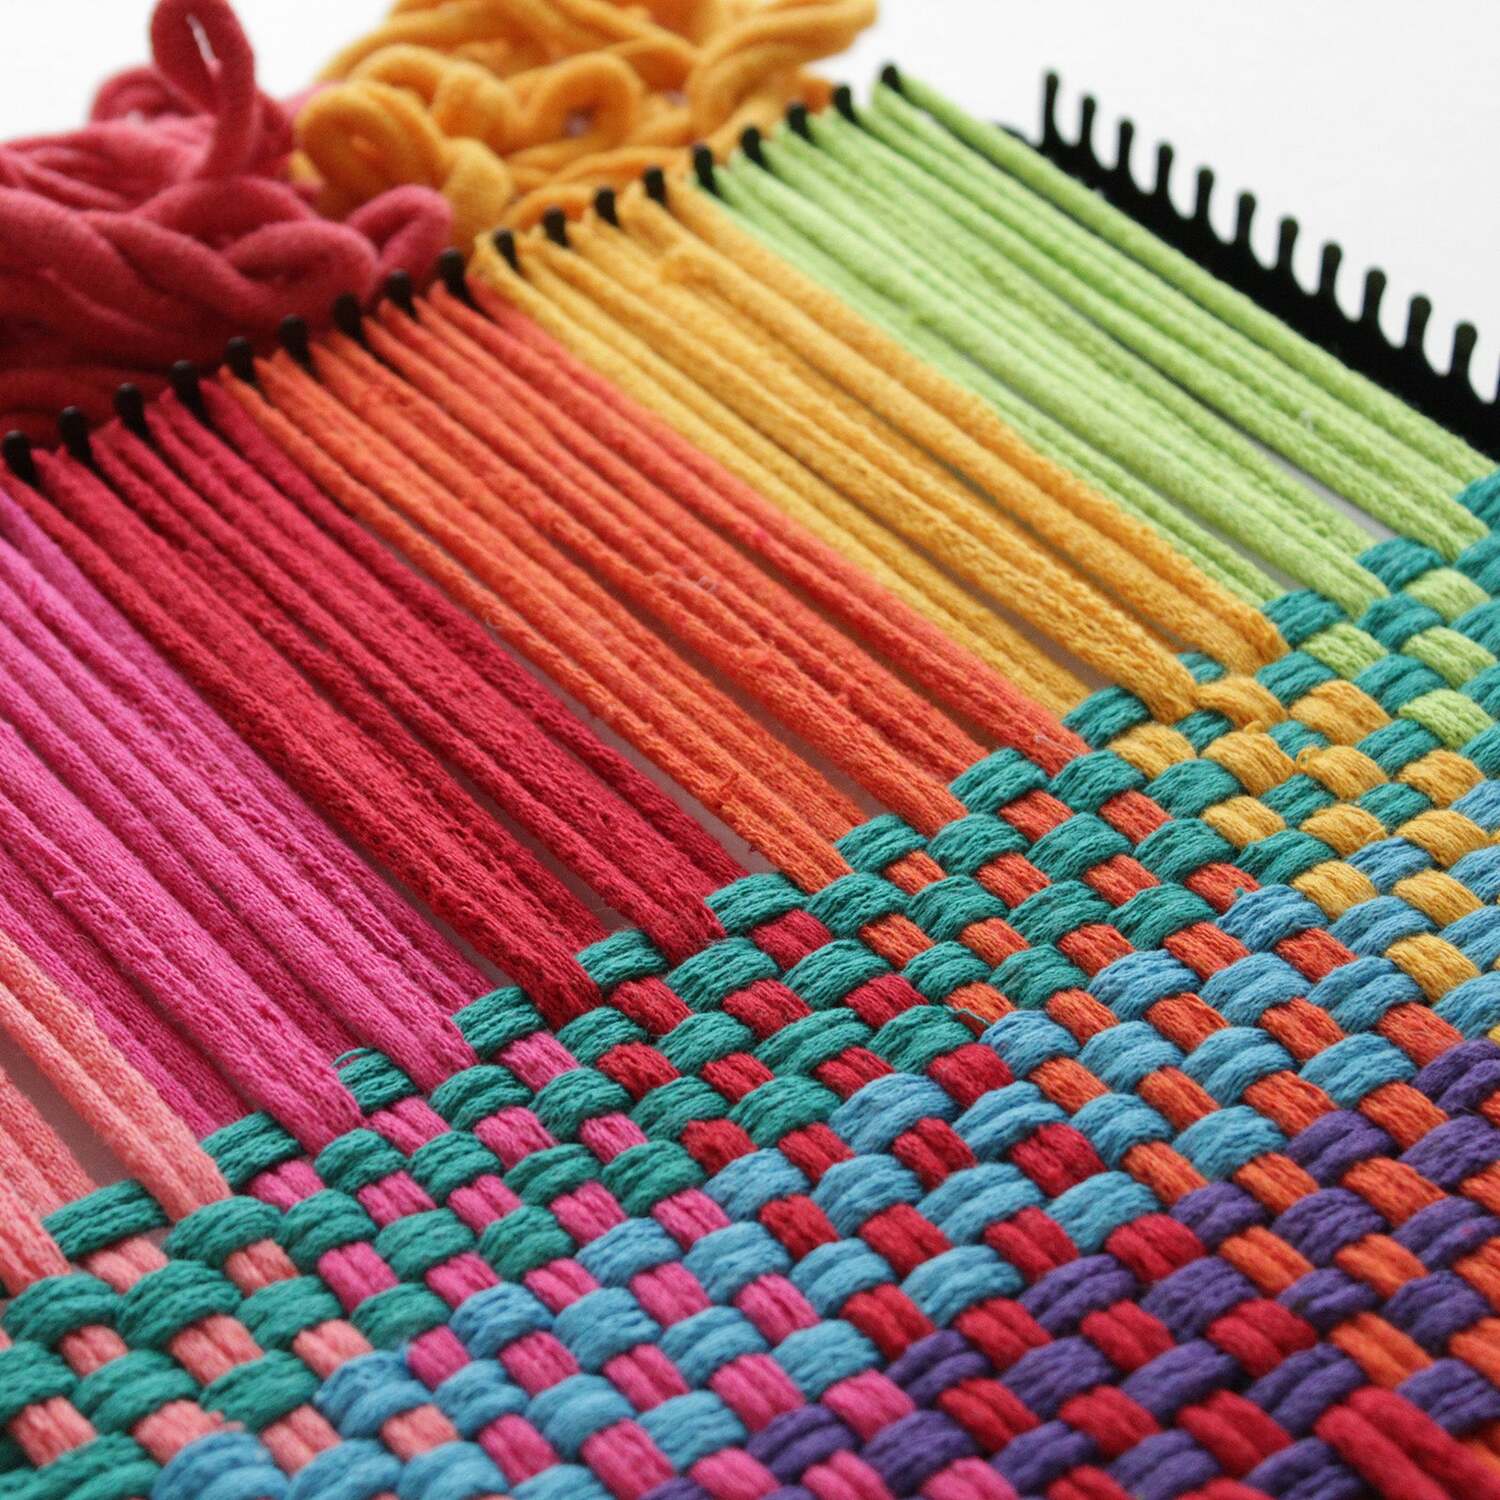 Traditional Potholder Loom and Loops Kit